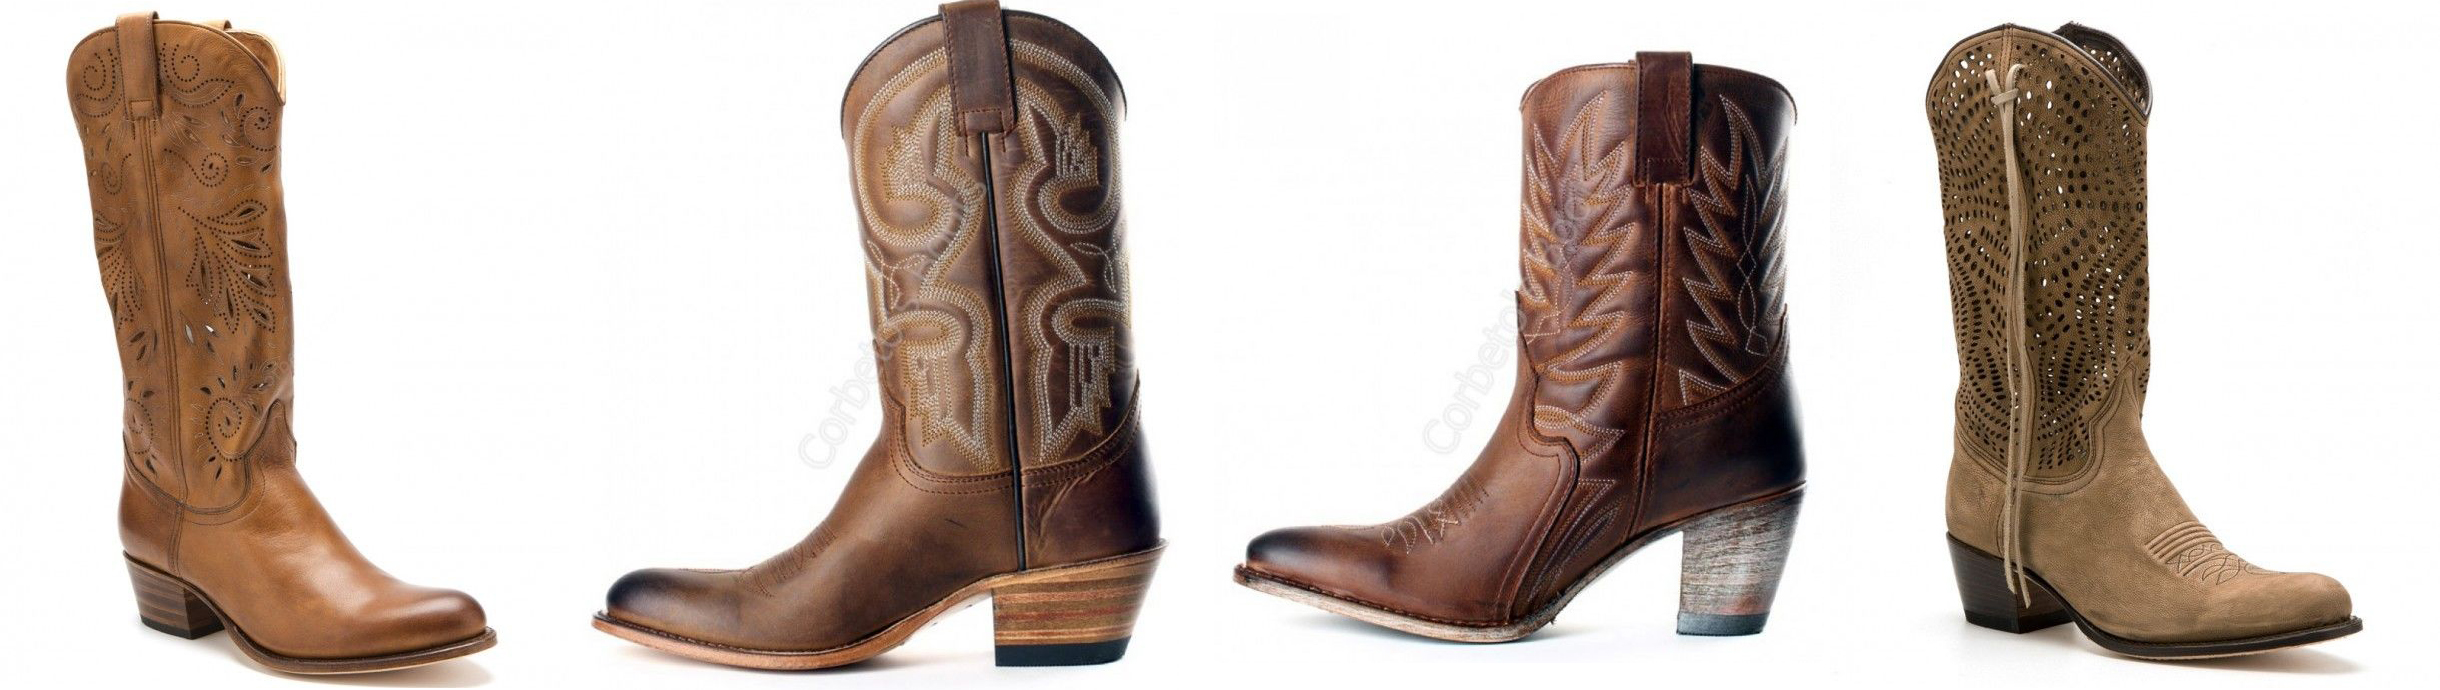 rounded cowgirl boots